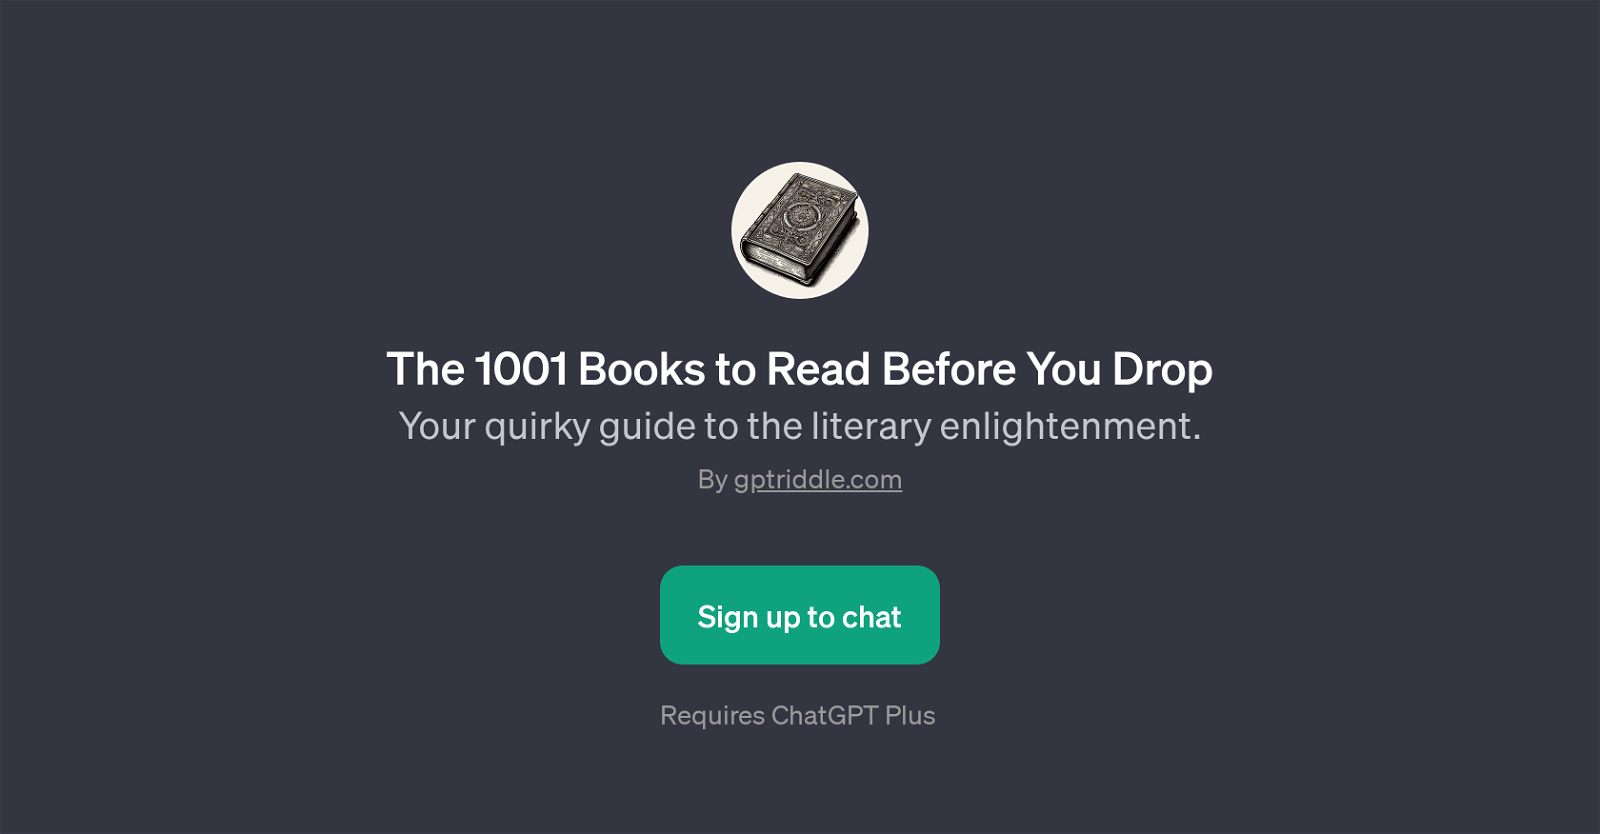 The 1001 Books to Read Before You Drop website